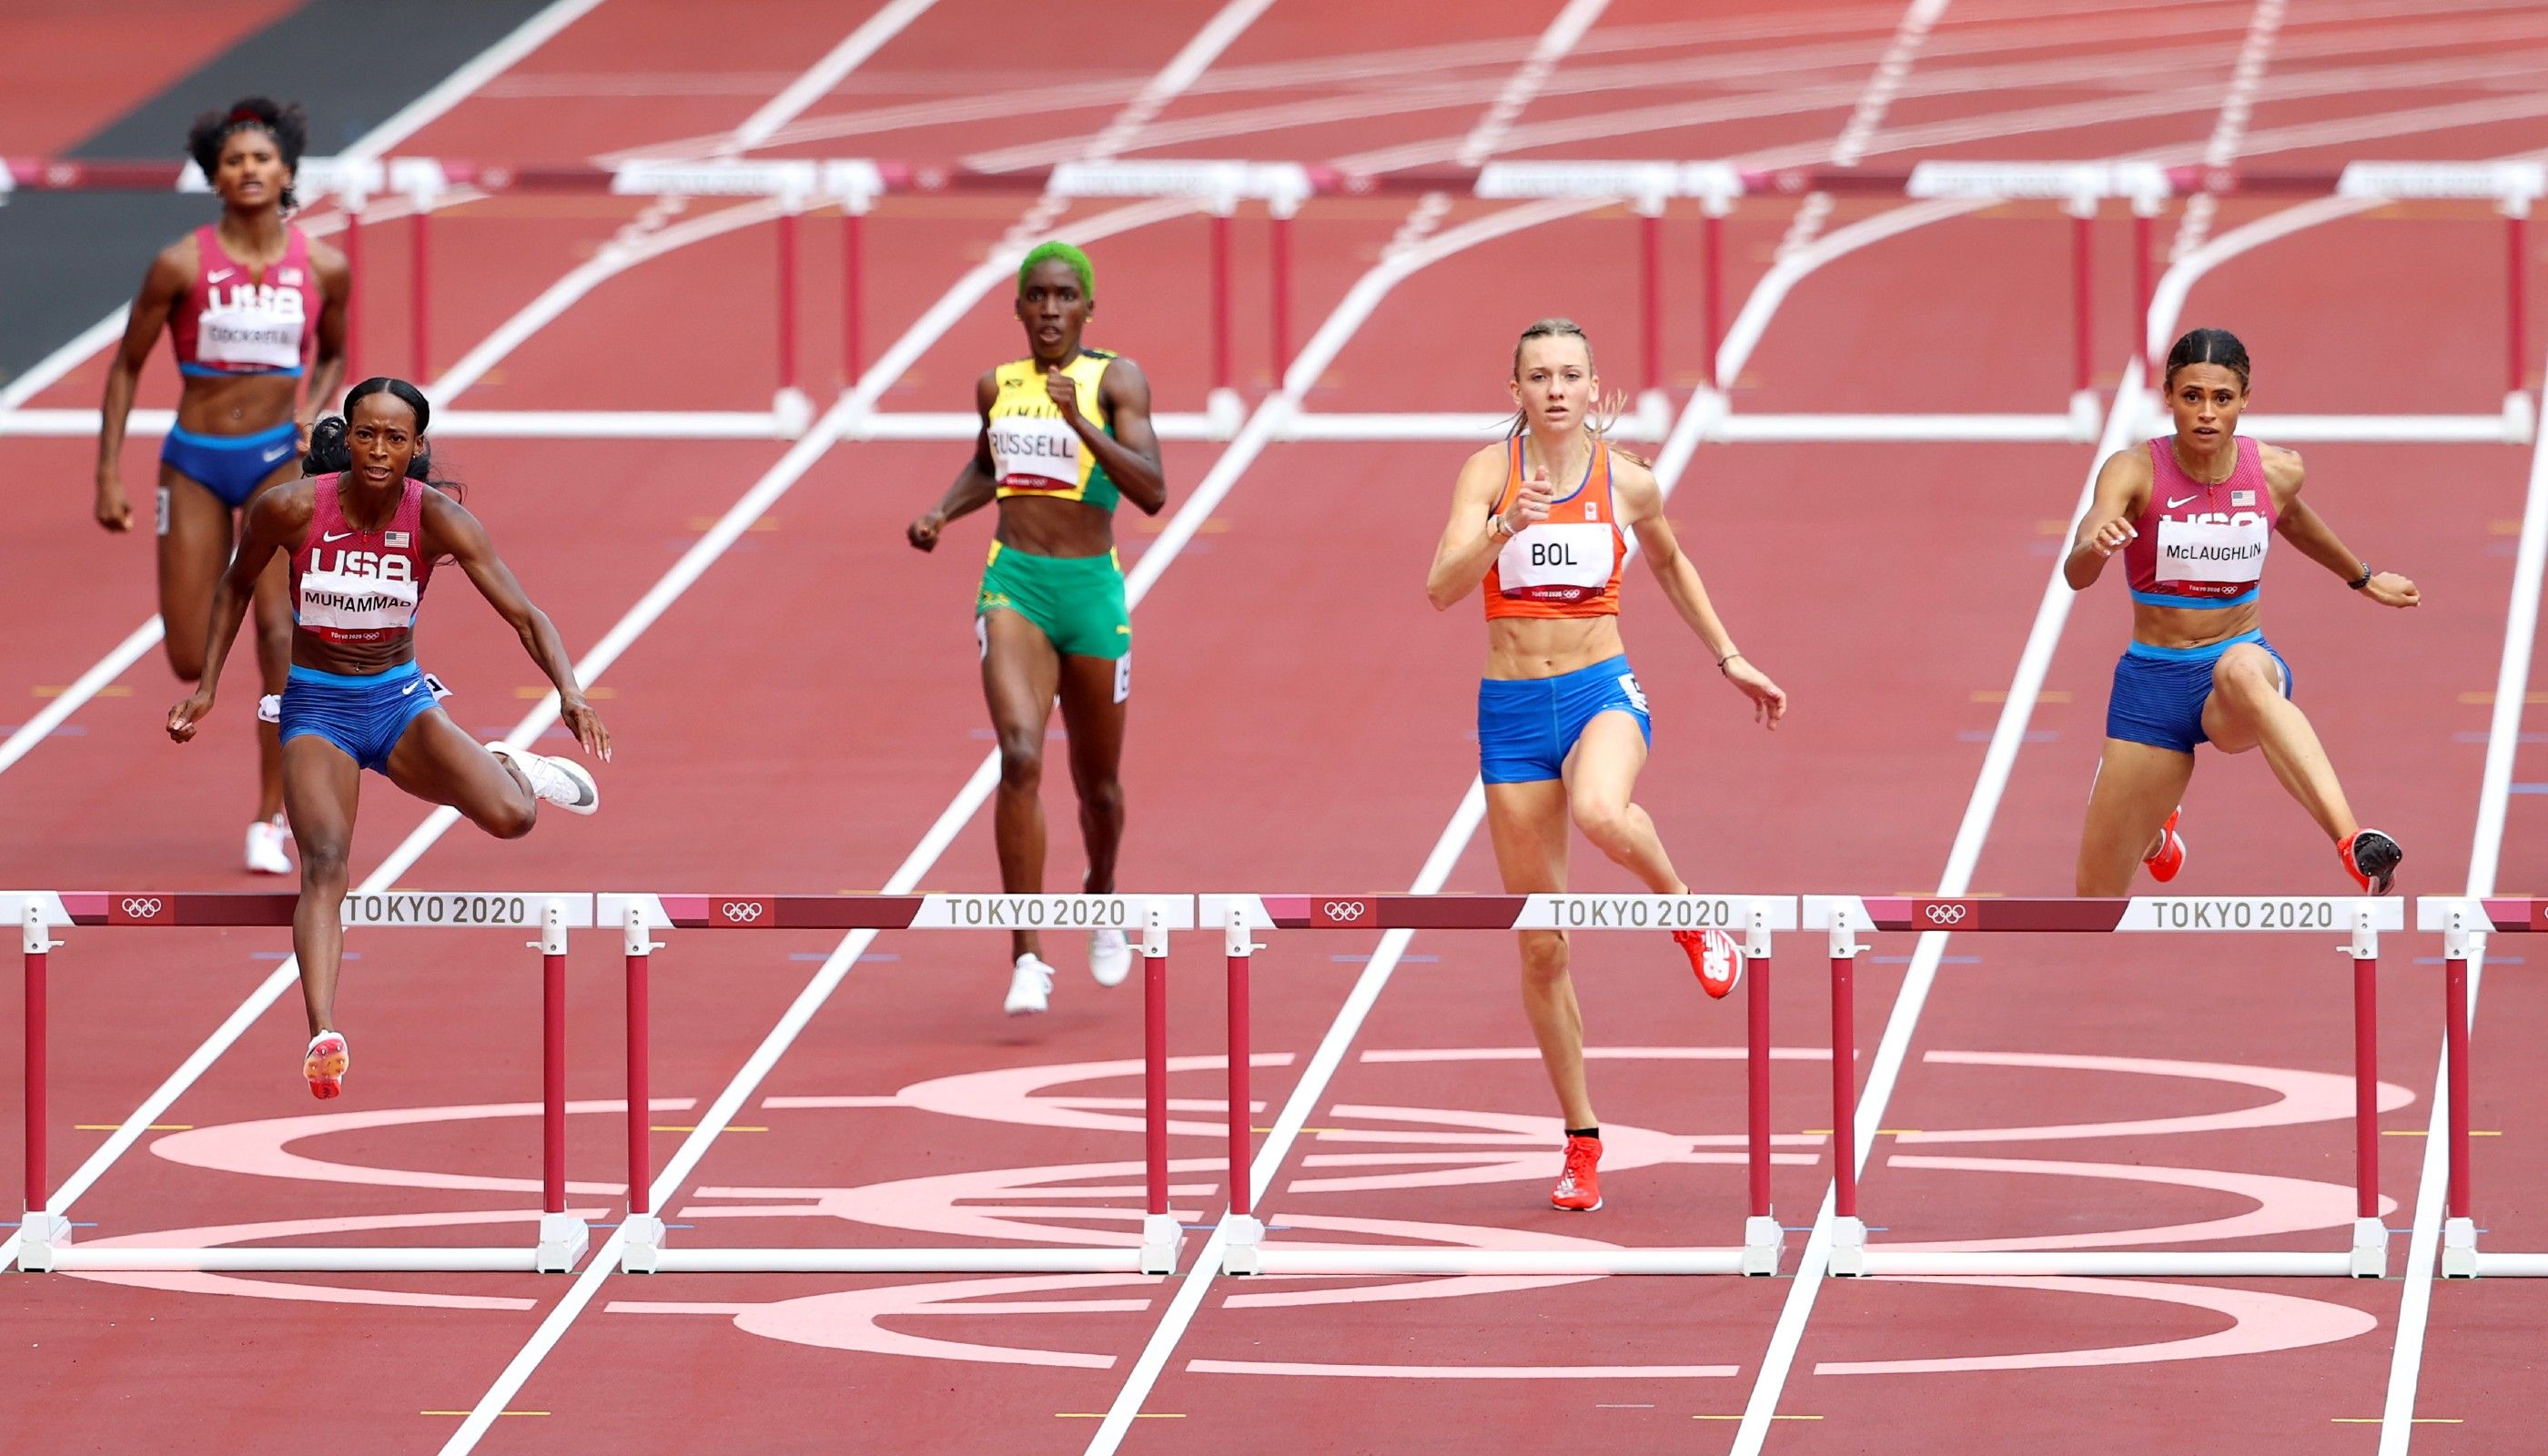 Dalilah Muhammad and Sydney McLaughlin battle for gold in historic Olympic women's 400m hurdles final in Tokyo